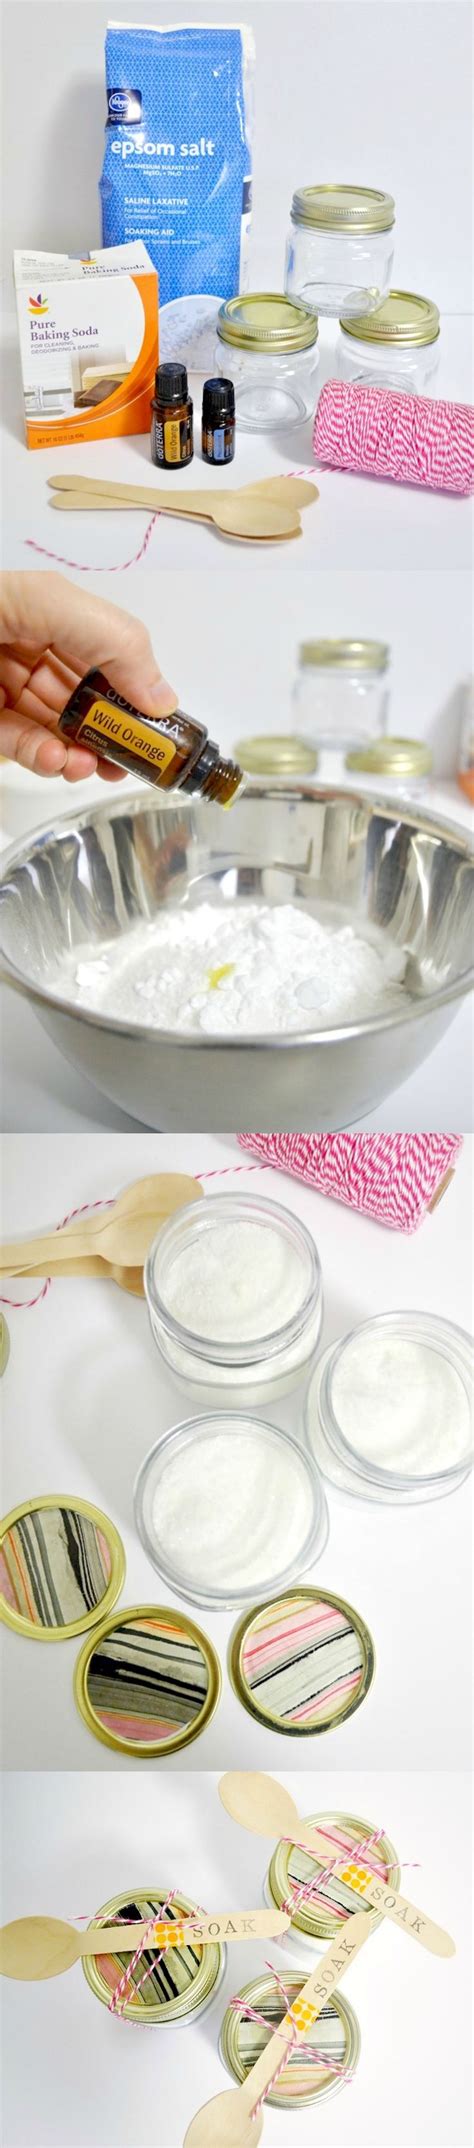 Learn How To Make Diy Bath Salts With Your Favorite Essential Oils You